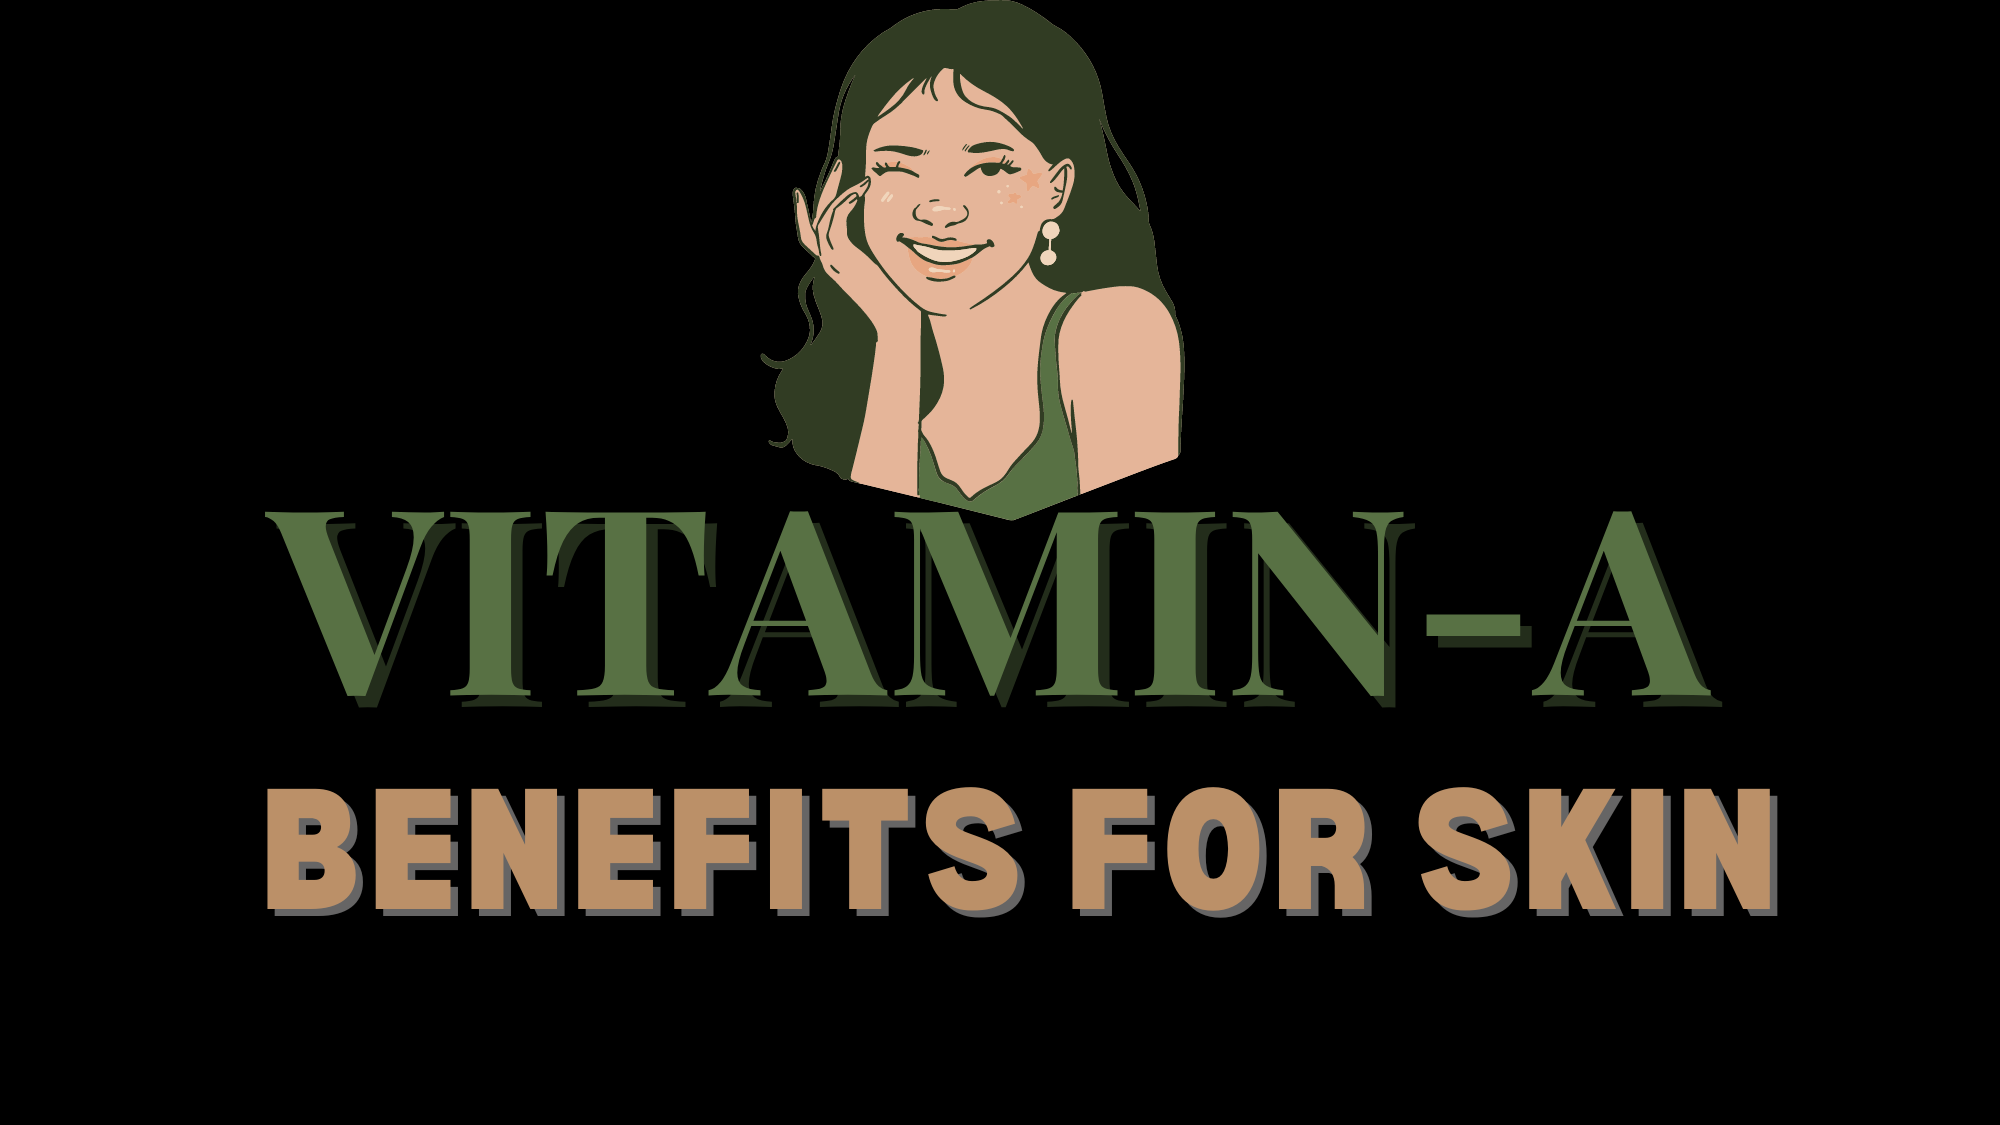 Vitamin A benefits for skin